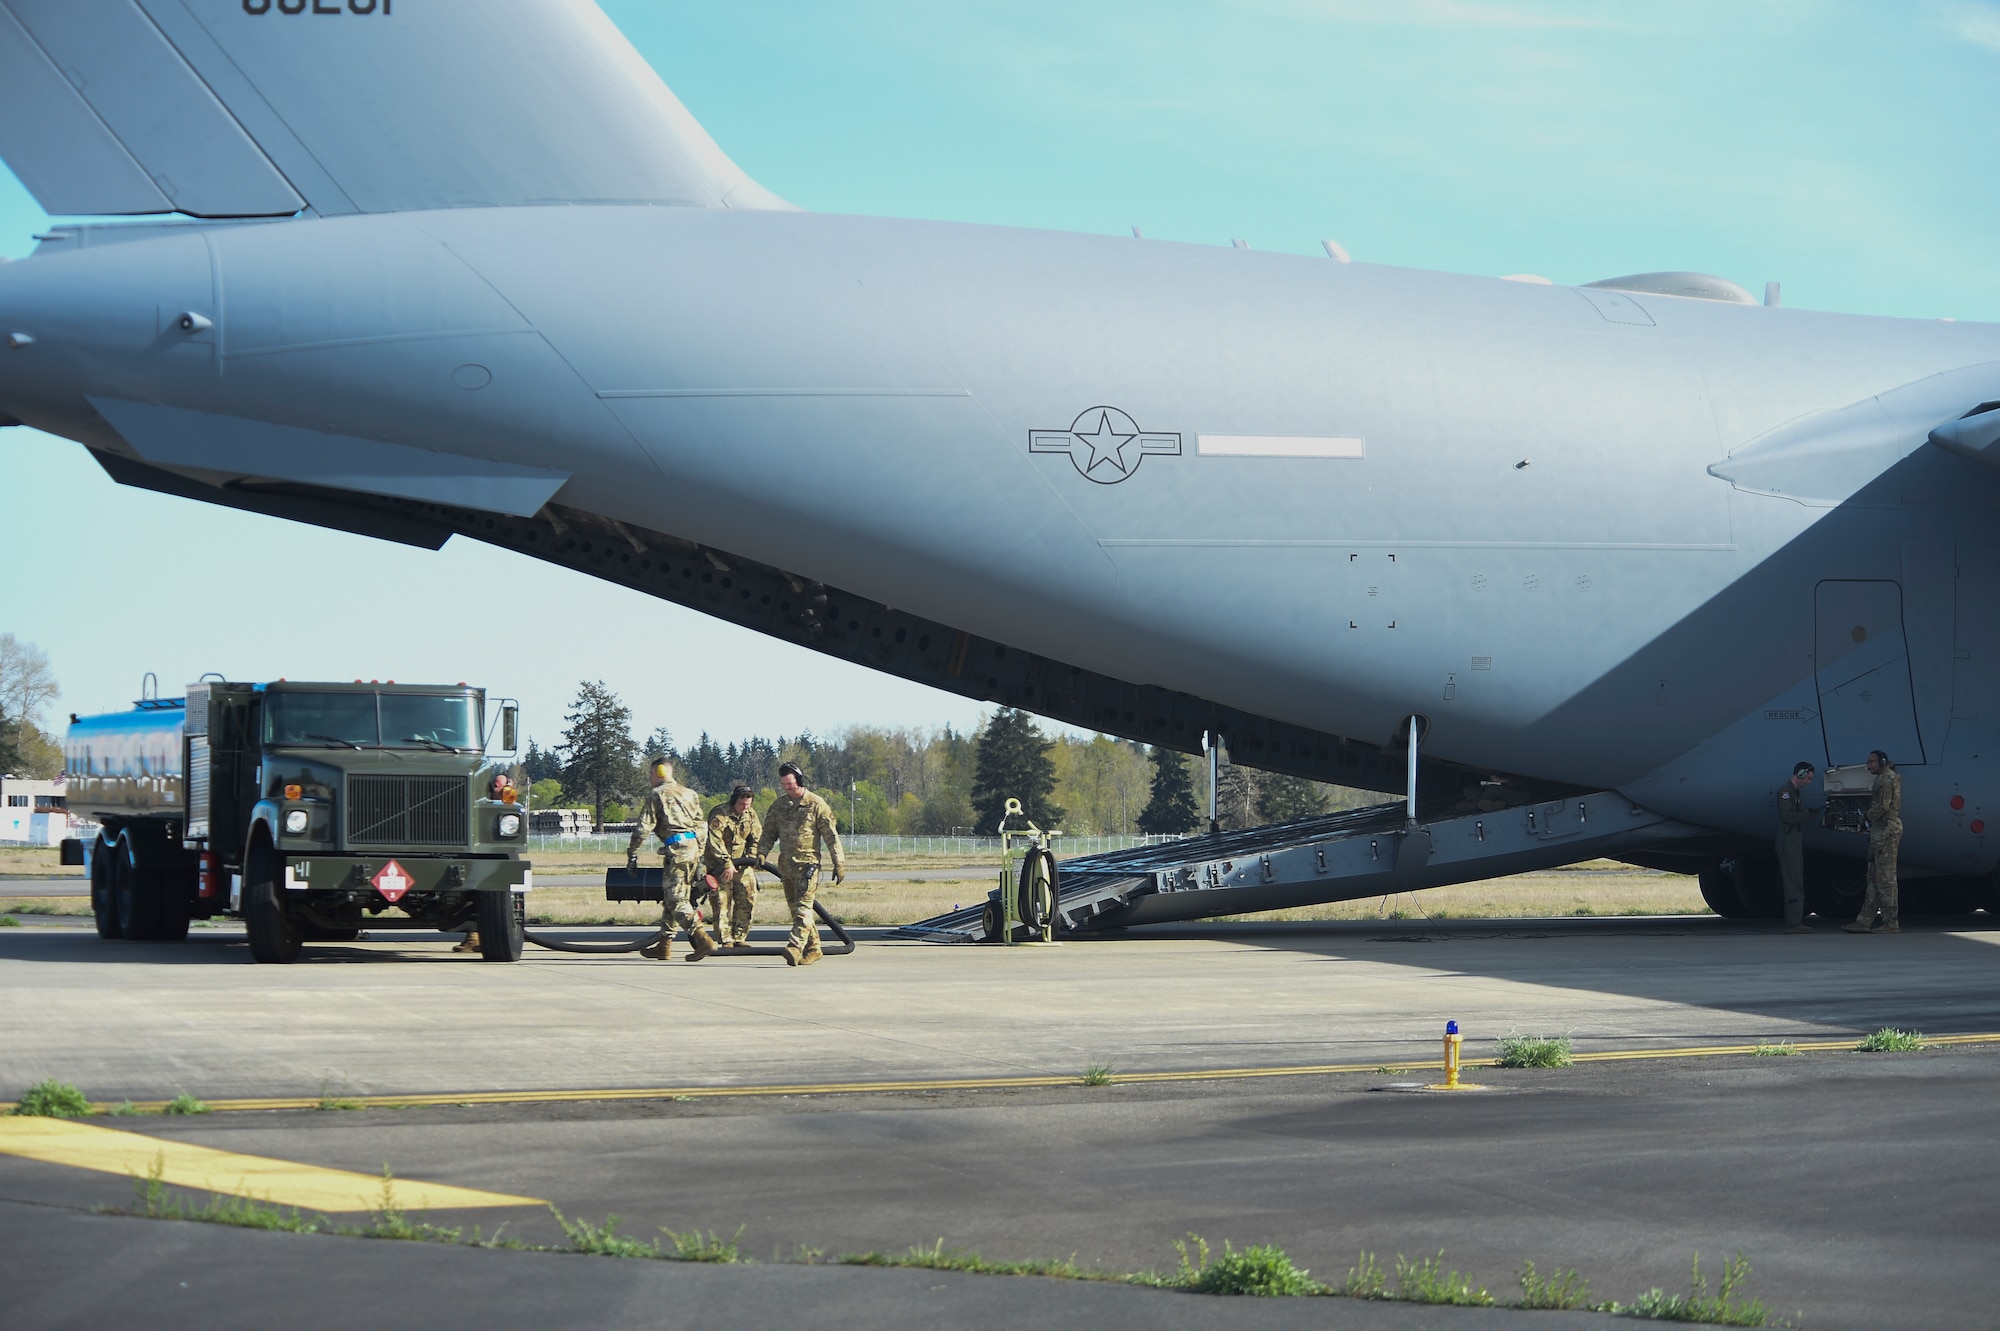 Airmen with the 62nd Airlift Wing and 627th Air Base Group demonstrate a wet-wing defuel procedure on a C-17 Globemaster III at Joint Base Lewis-McChord, Washington, April 21, 2021, as part of Exercise Rainier War. The exercise tests the 62nd AW’s capability to plan, generate and execute a deployment tasking, sustain contingency operations, demonstrate full spectrum readiness while in a contested, degraded and operationally limited environment. (U.S. Air Force photo by Master Sgt. Julius Delos Reyes)